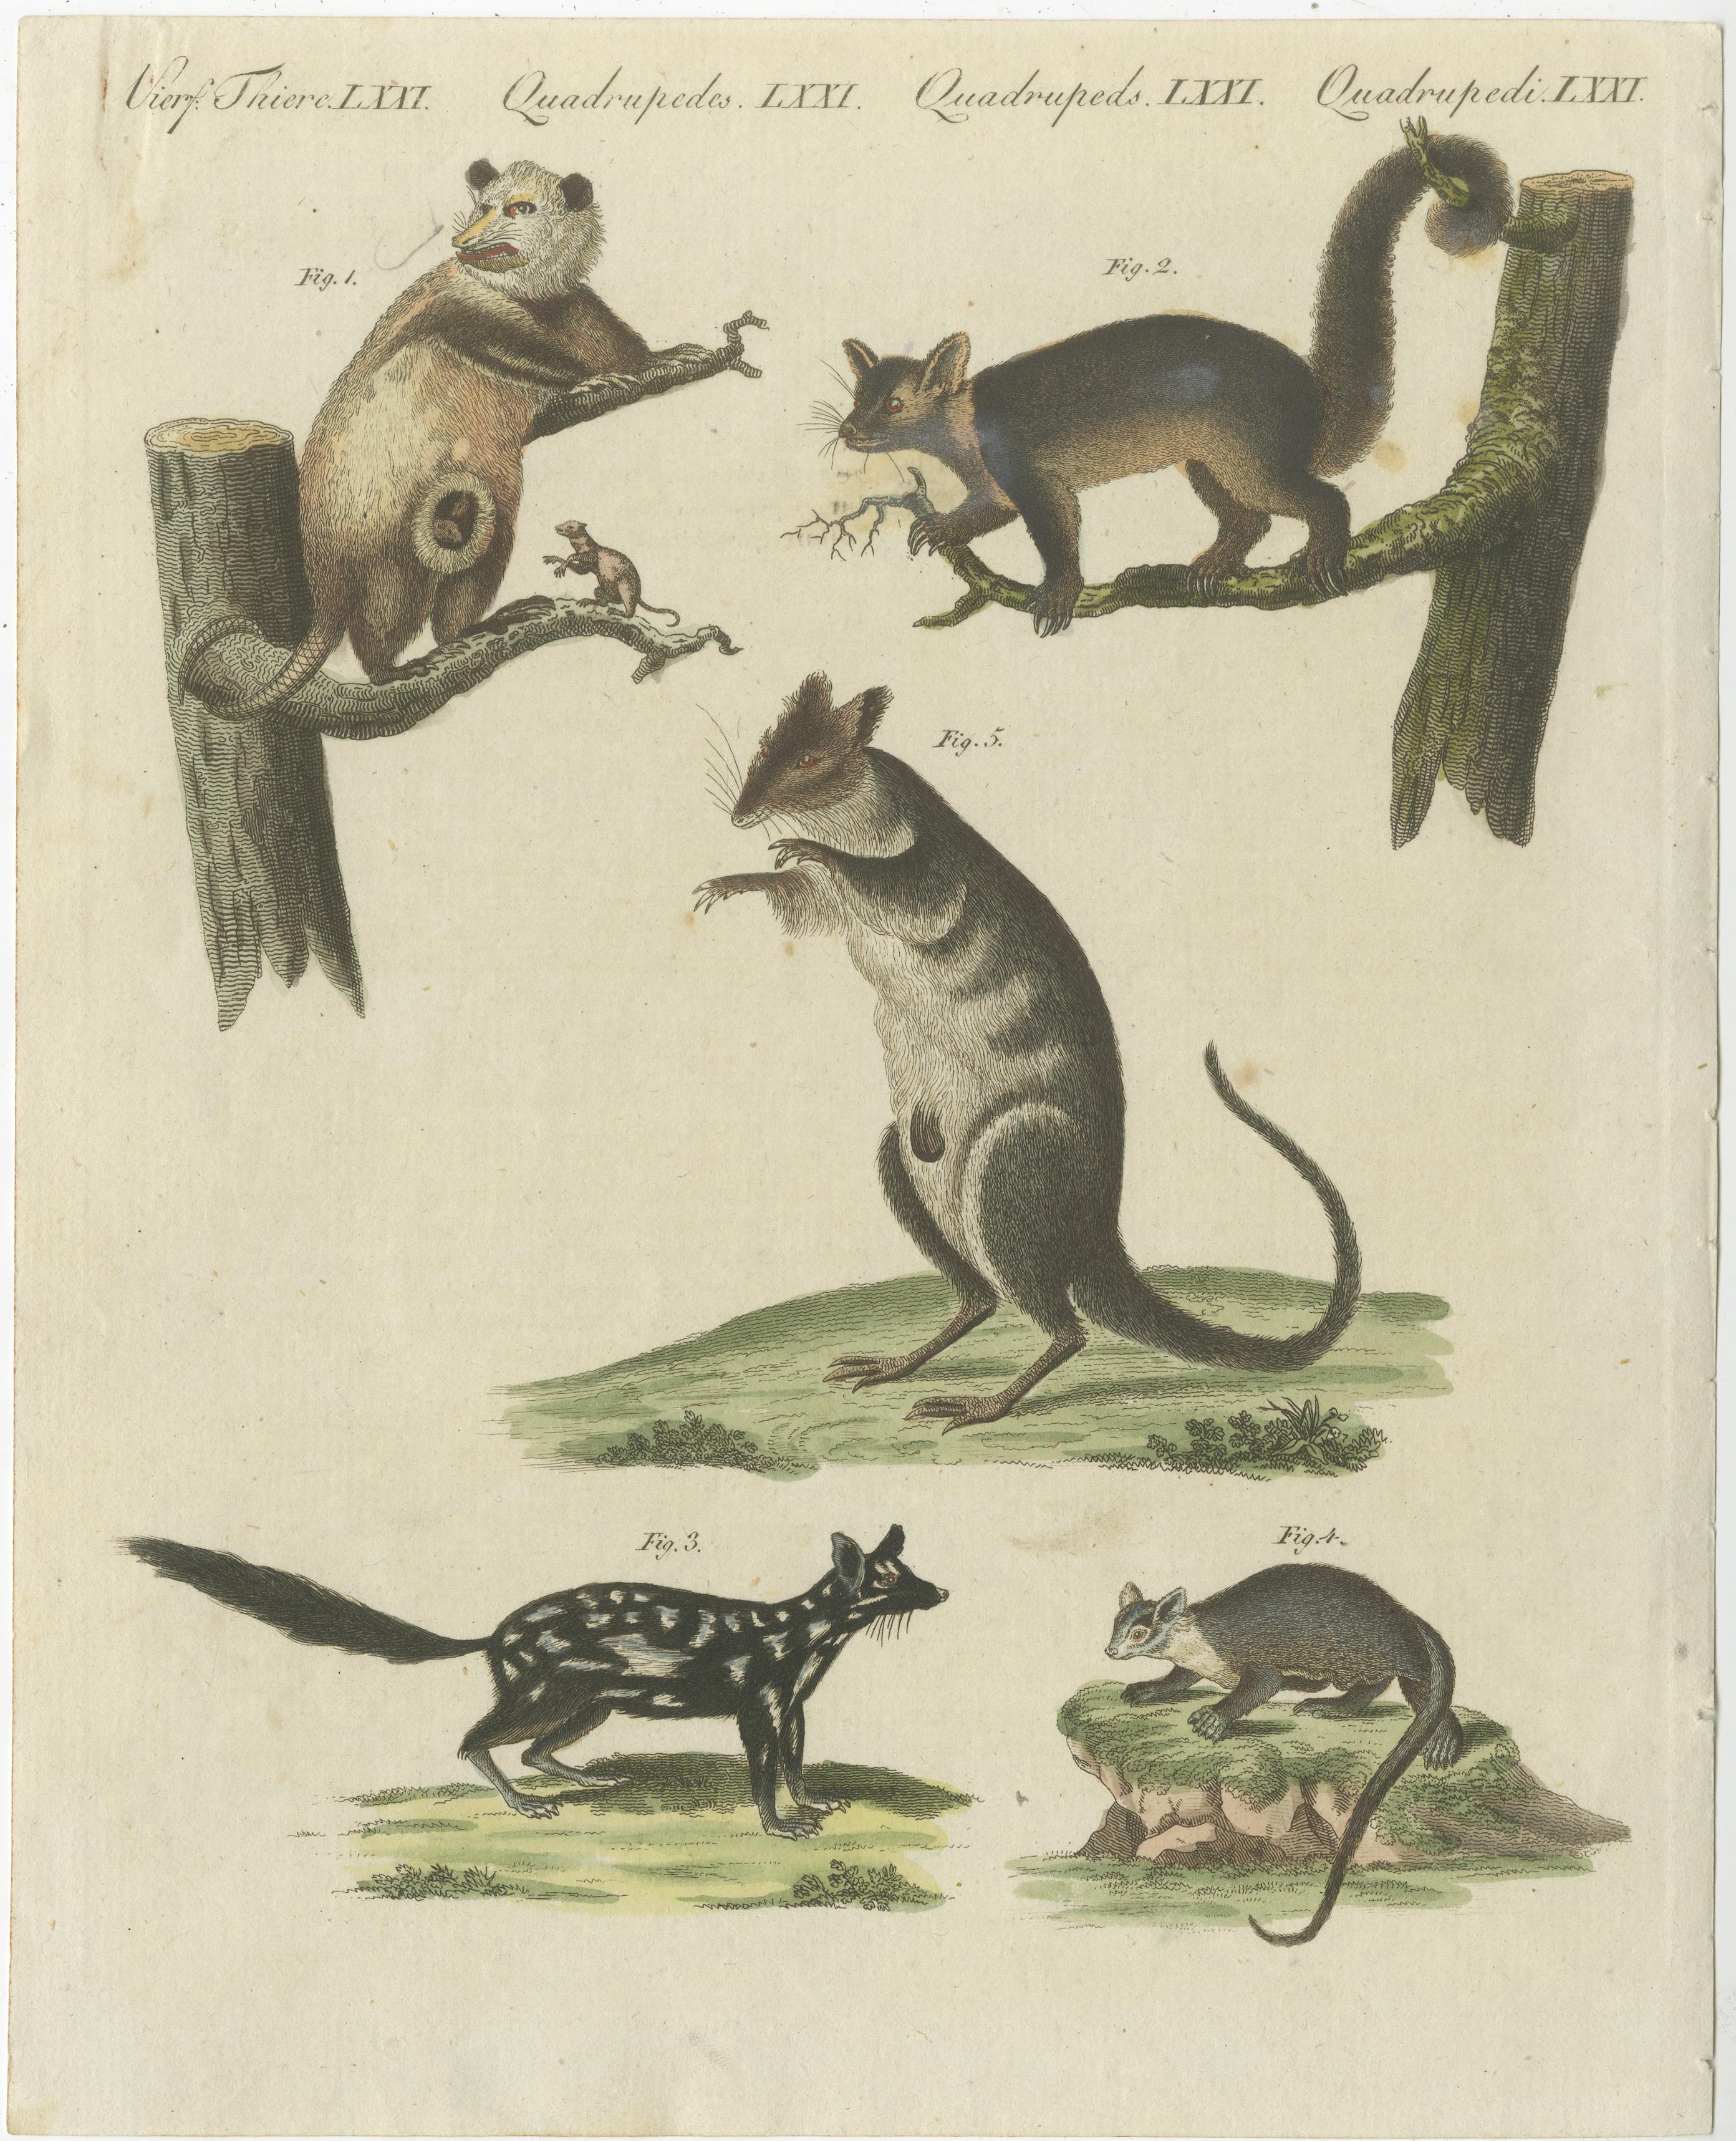 Original antique print of opossums. Originates from Bertuch's 'Bilderbuch für Kinder'. In 1790 Friedrich Justin Bertuch started his biggest book-project ever. Issued in 12 volumes it containes short articles written at a child's level of